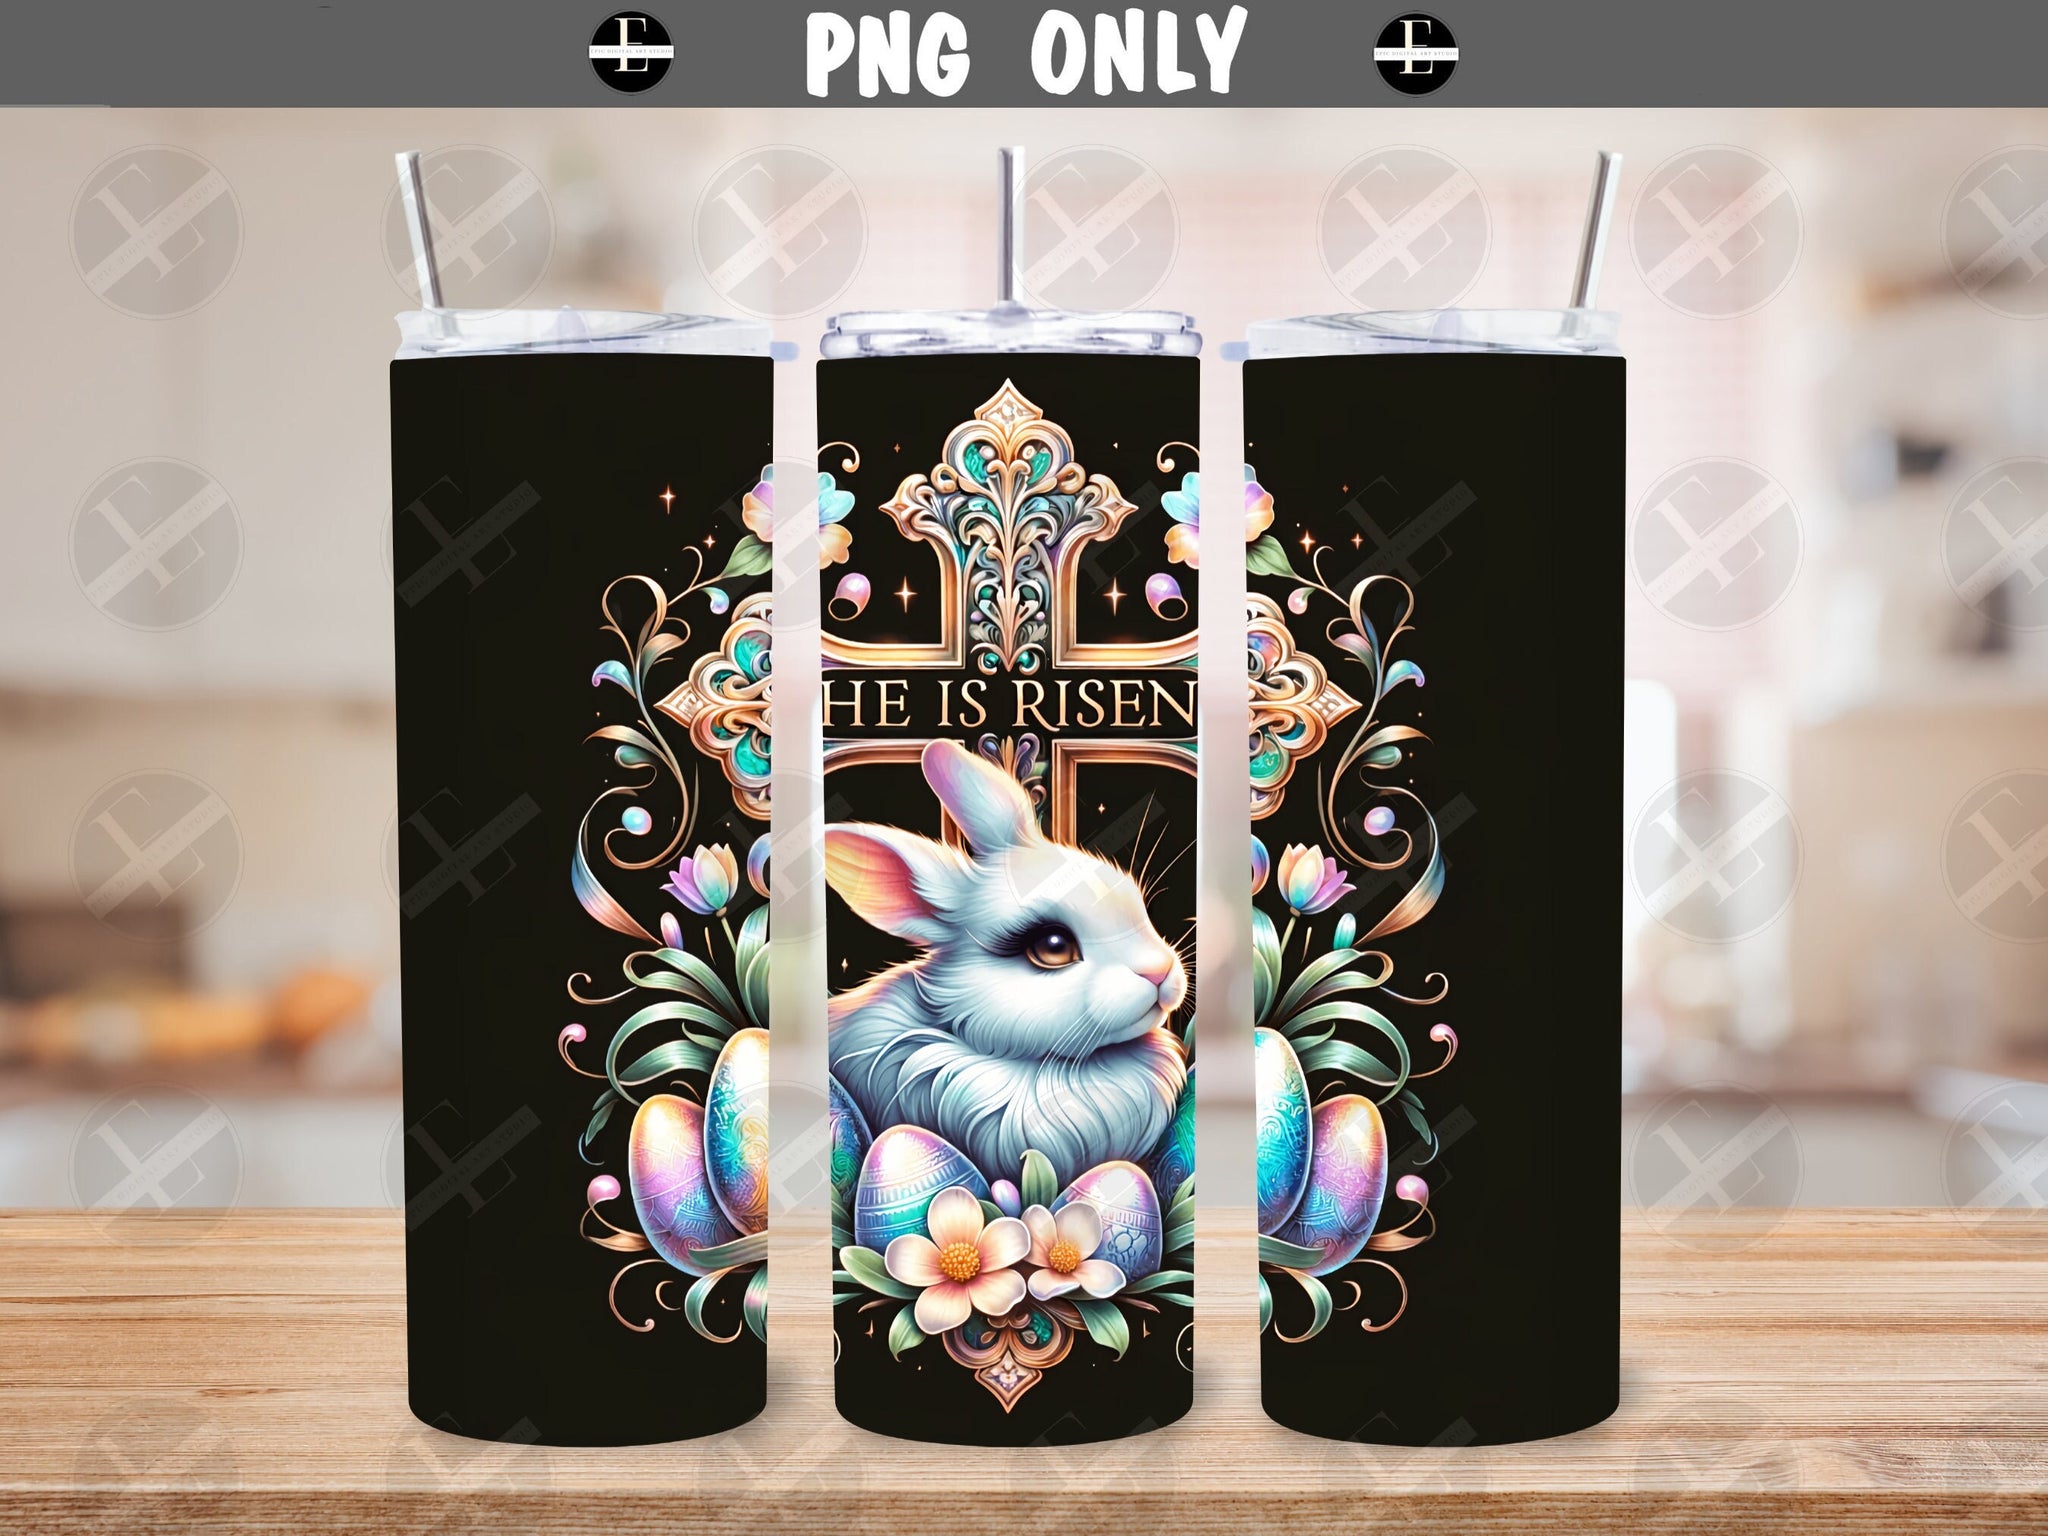 20ozs wrap design, easter tumbler wrap, he is risen, 20ozs skinny wraps, 20ozs wraps designs, tumbler 20ozs wraps, tumbler wrap 20ozs, wrap design 20ozs, wrap png design 20ozs, 20ozs wraps, 20ozs wrap, 20ozs tumbler wrap